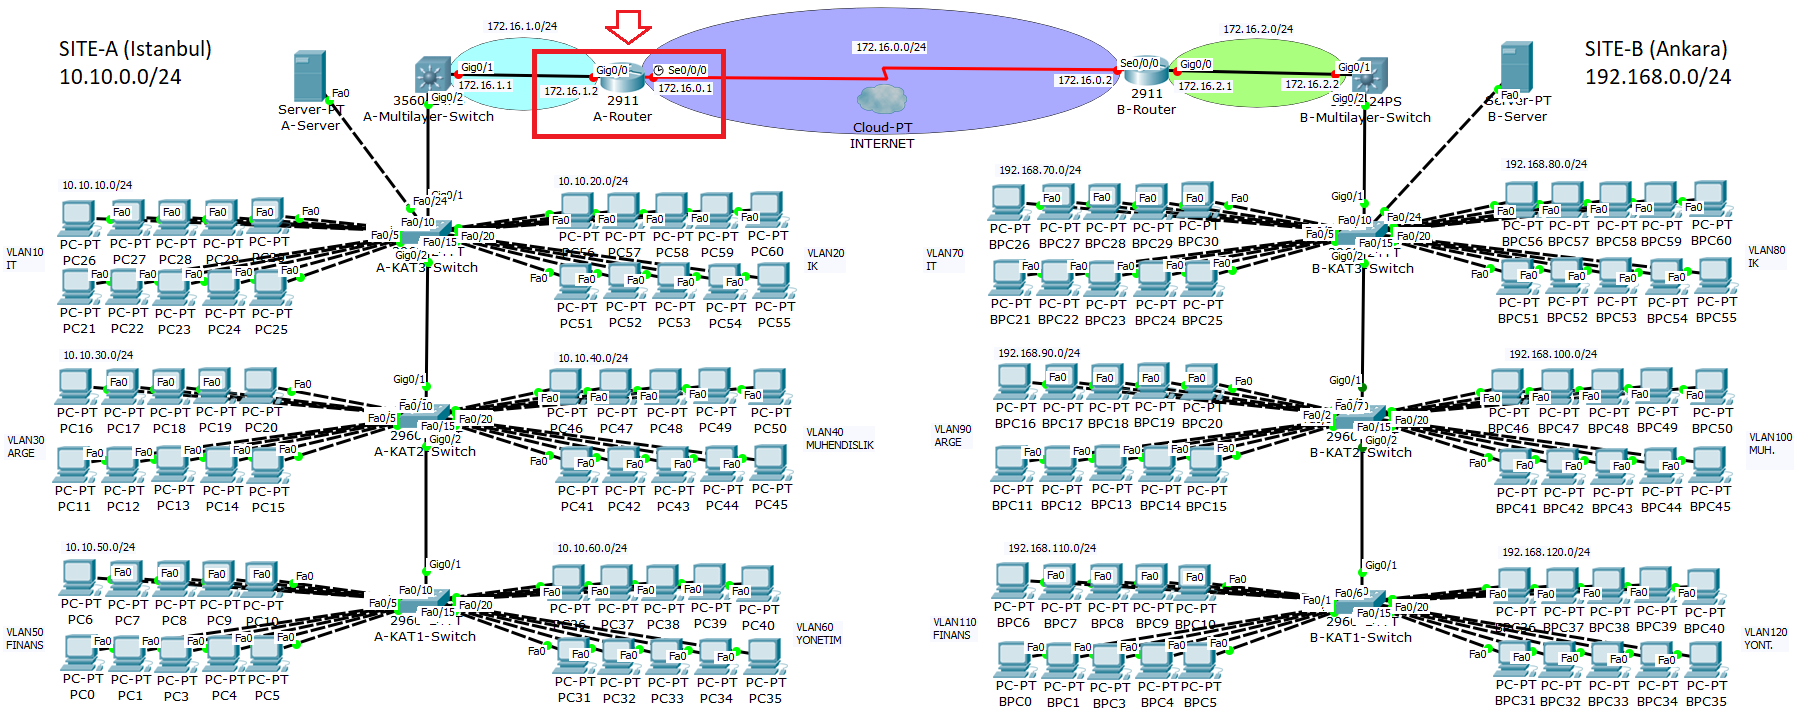 vlan point to point routing